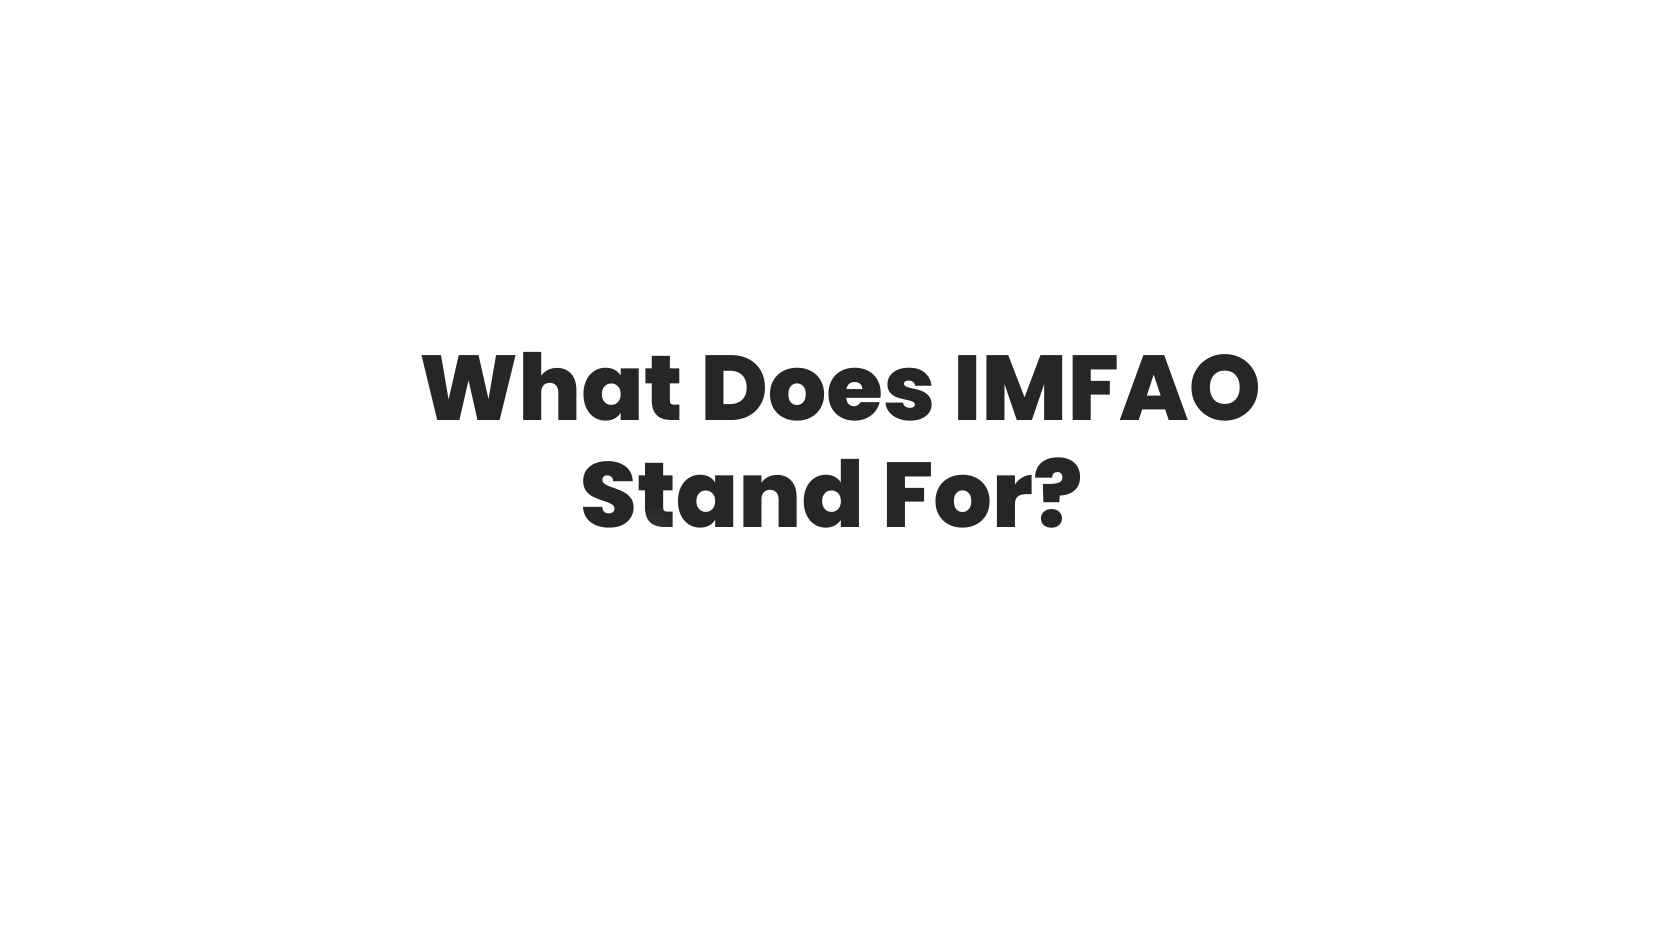 What Does IMFAO Stand For